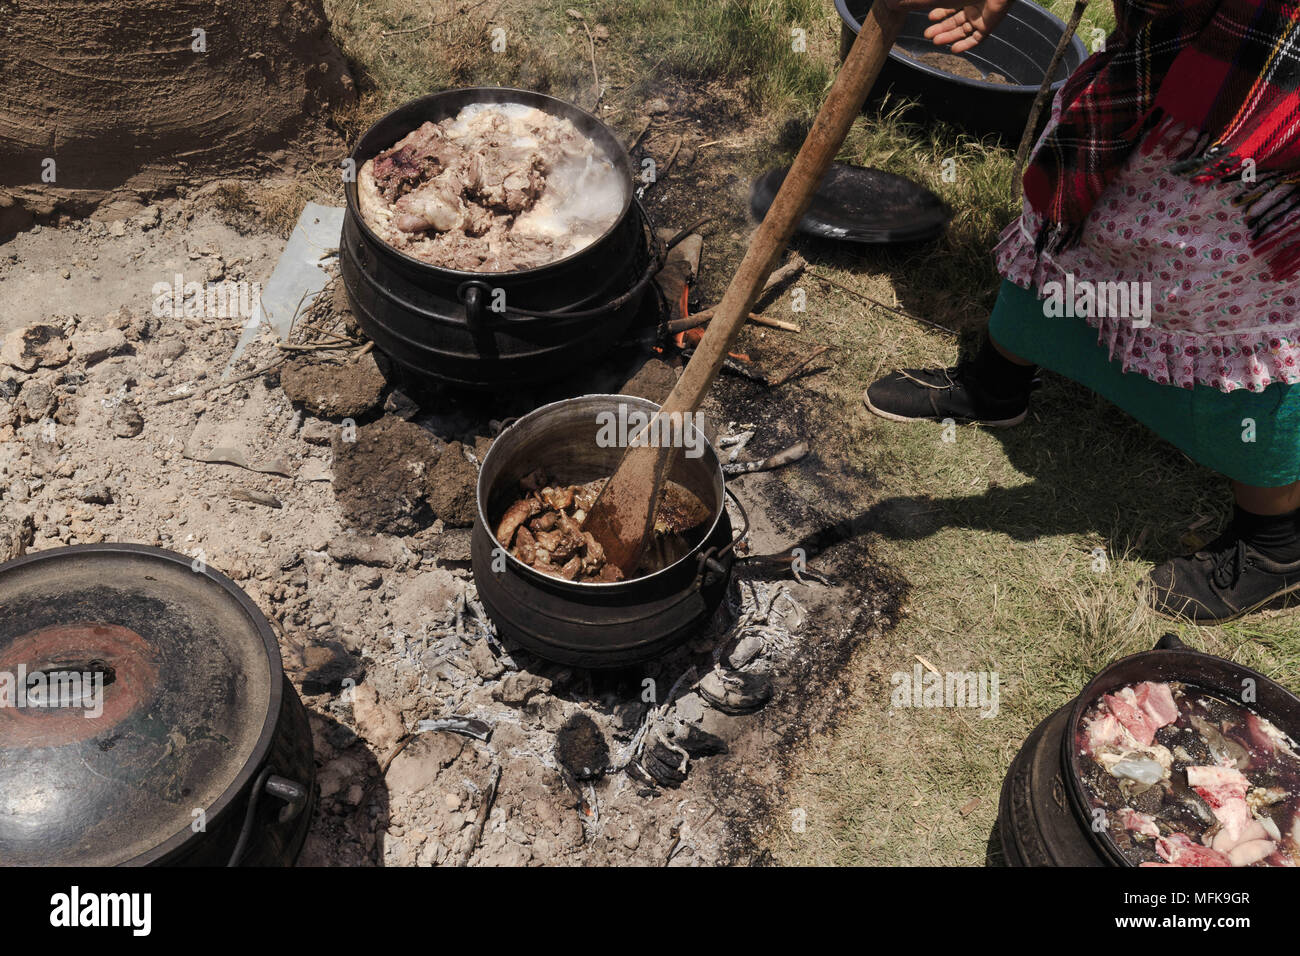 December 2, 2017 - Matatiele, Eastern Cape, South Africa - A Xhosa women prepares meat for an initiation ceremony at an open fire place. (Credit Image: © Stefan Kleinowitz via ZUMA Wire) Stock Photo